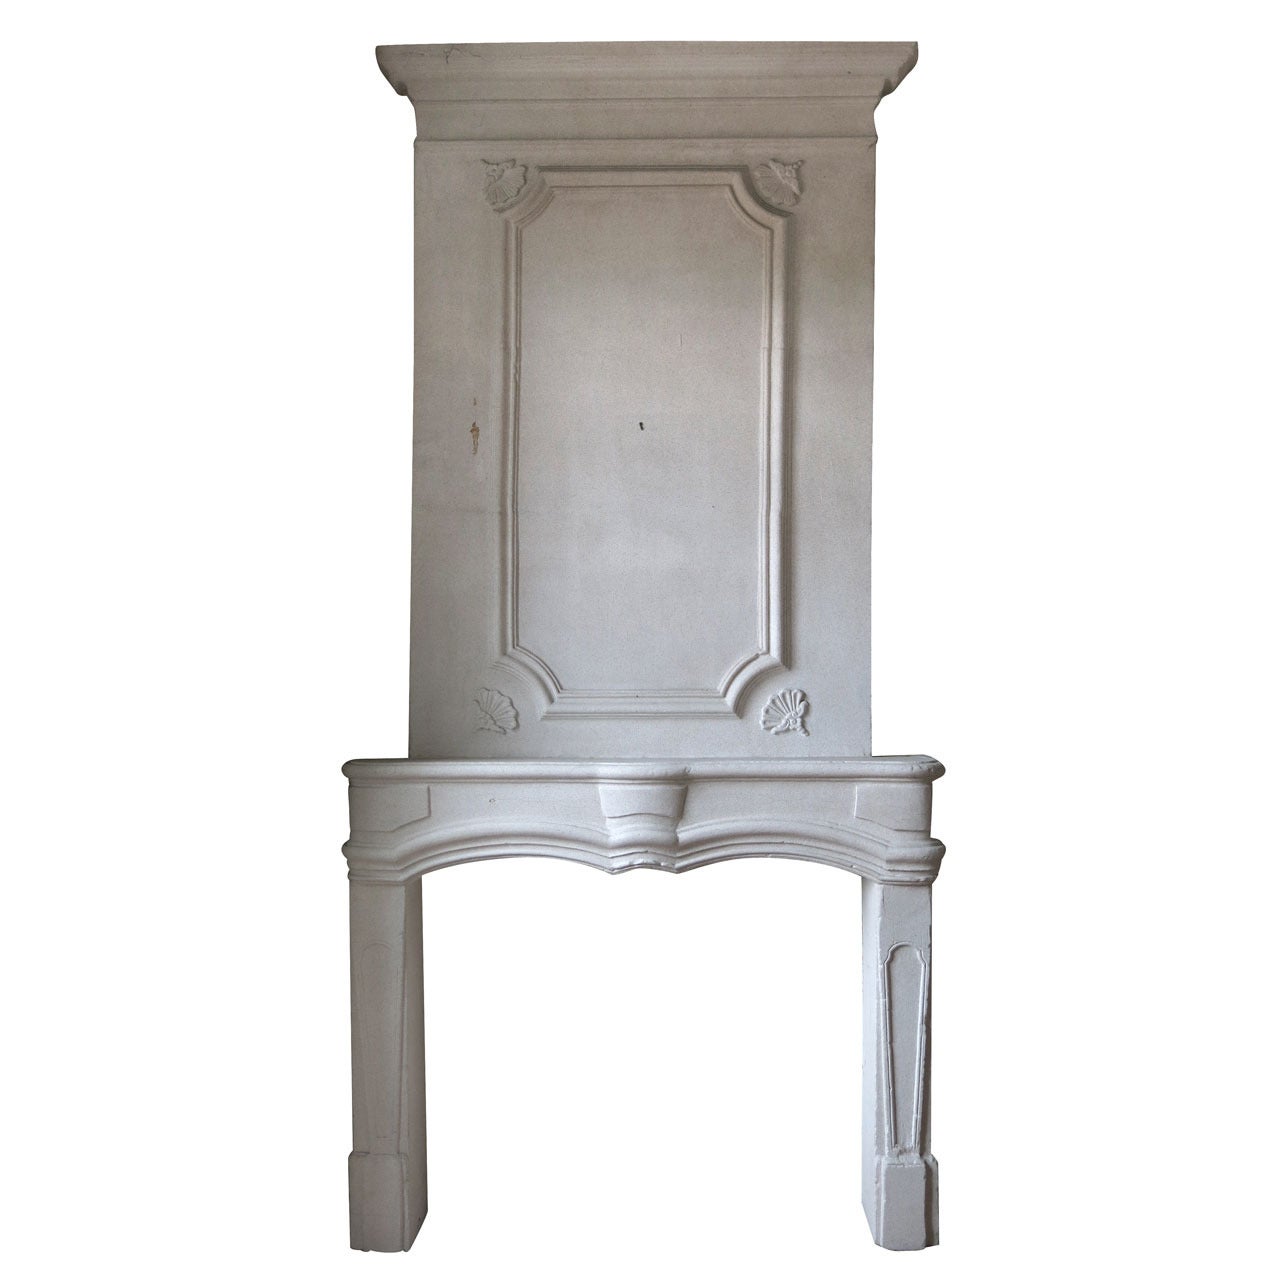 Louis XIV Period 17th Century Bombee Fireplace with Trumeau Original France For Sale